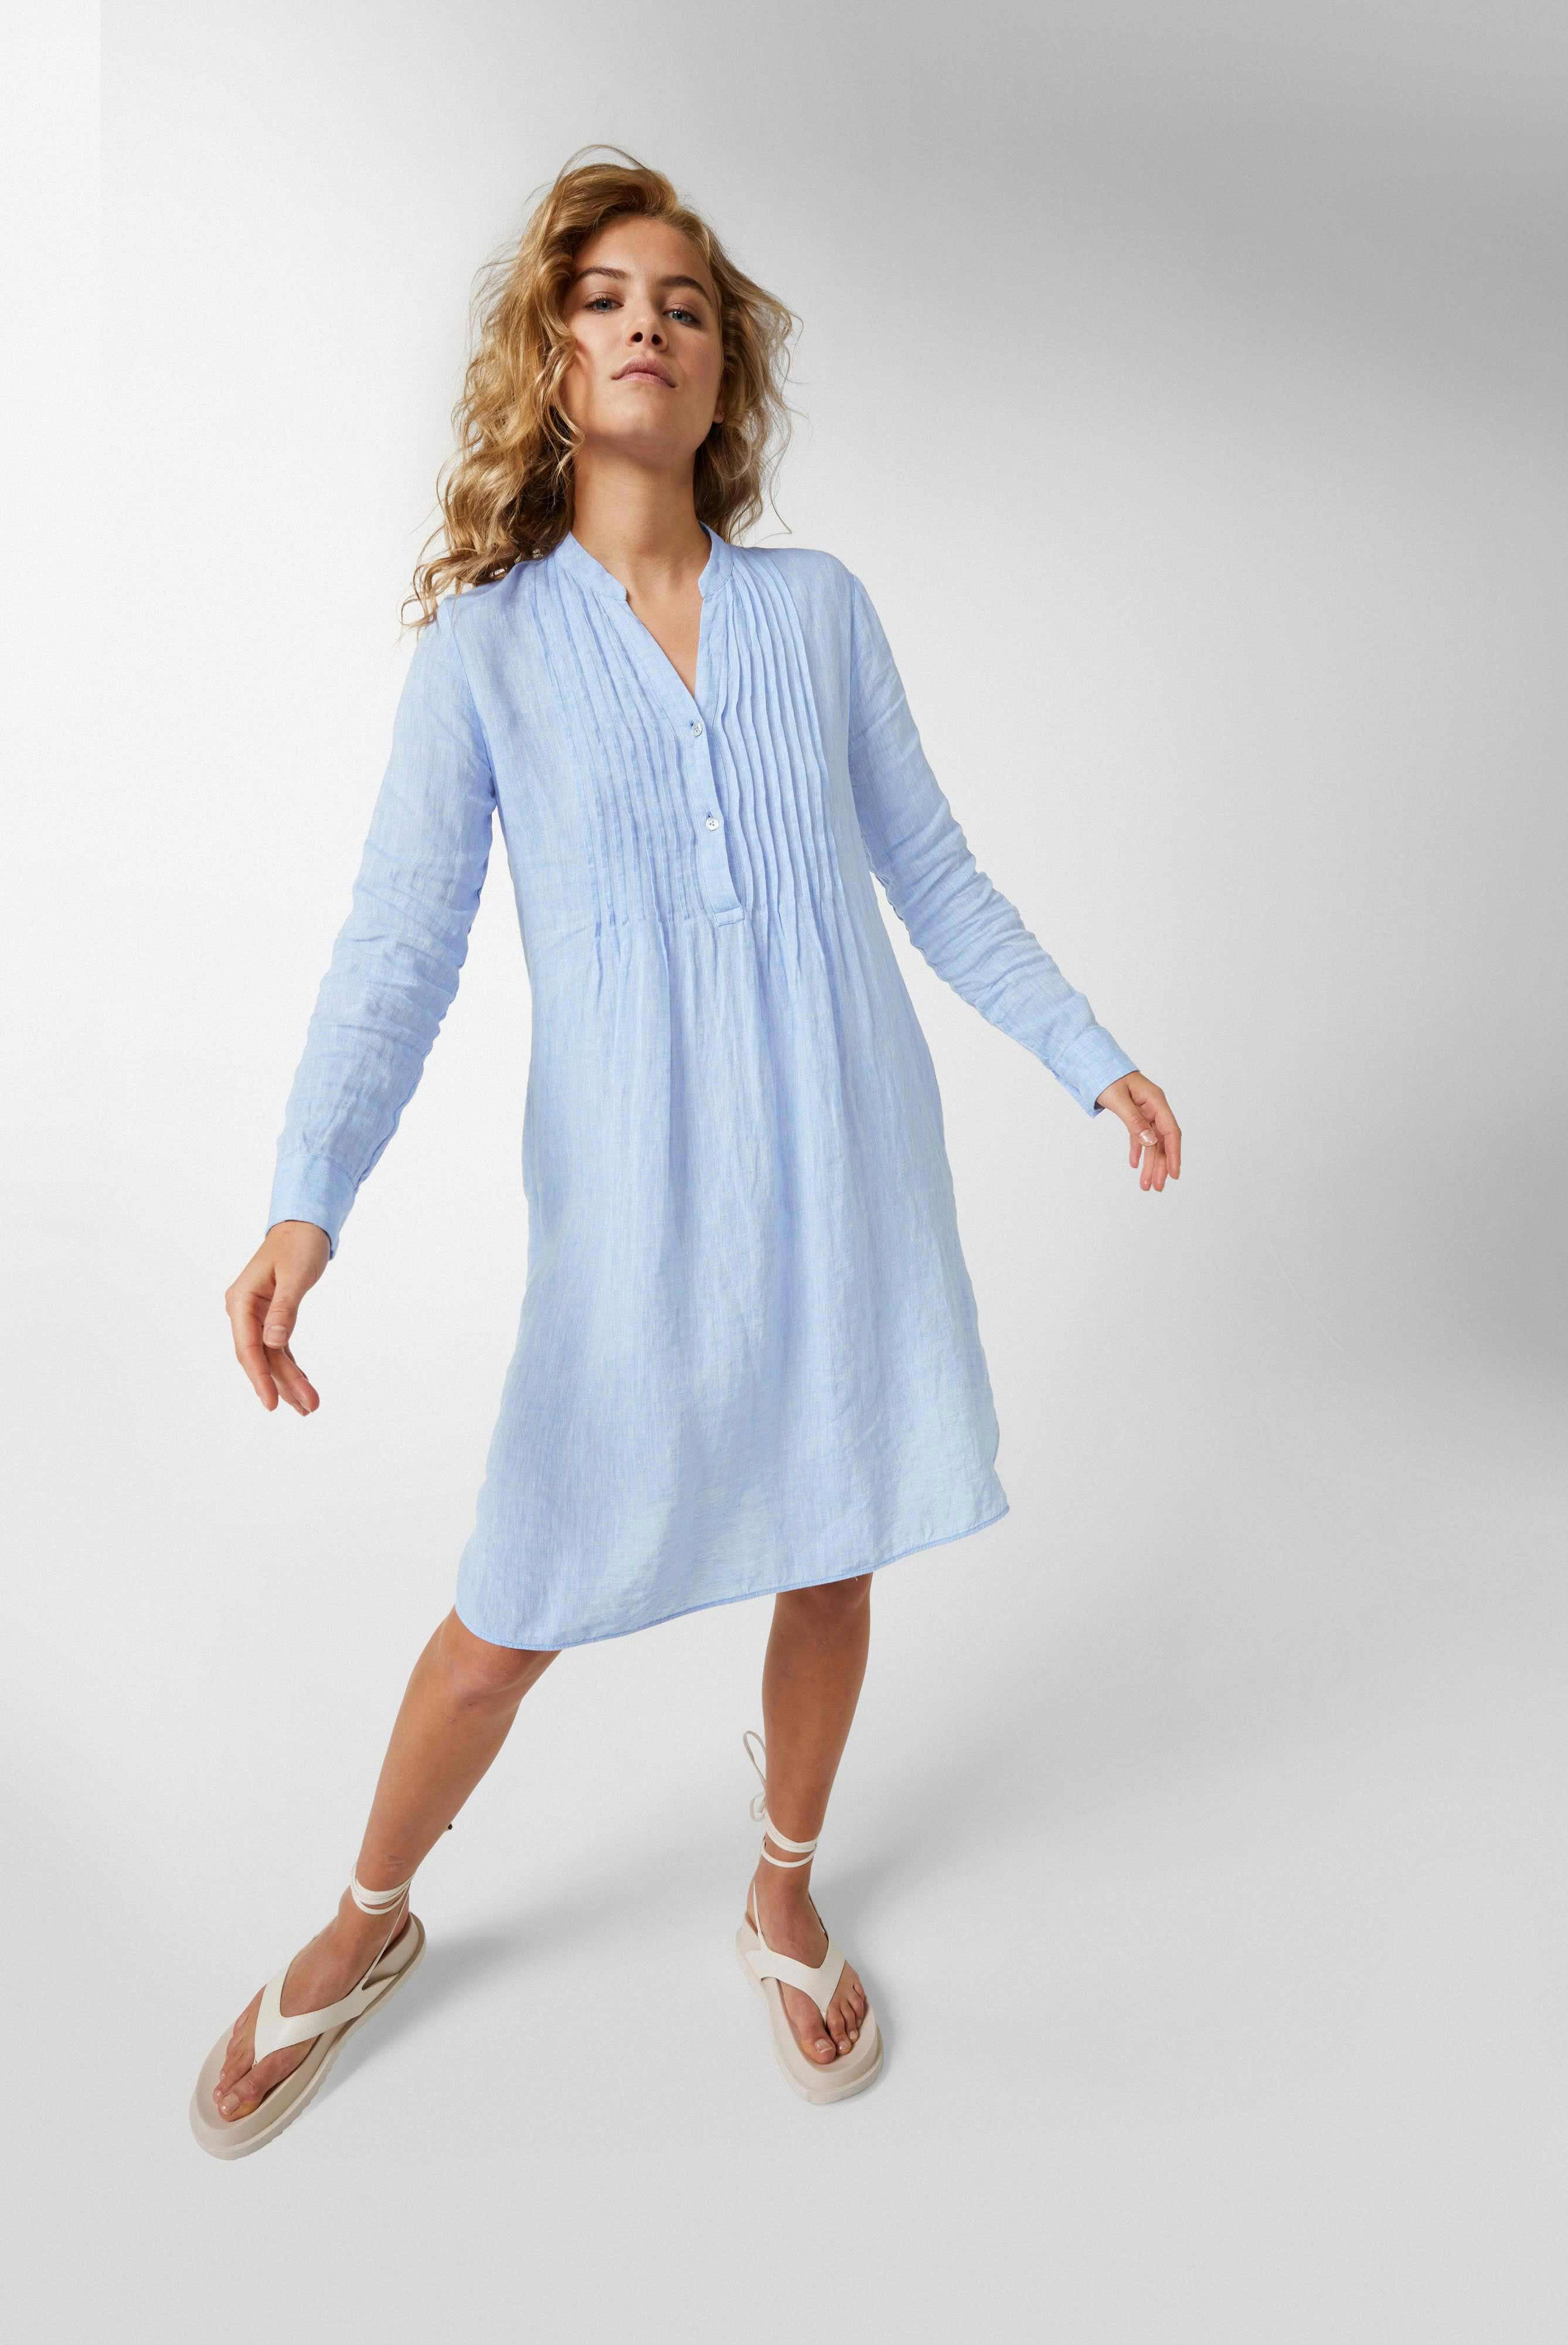 Dresses & Skirts+Knee-length linen dress with stand-up collar and ruffles blue+05.657K.2L.155038.720.32